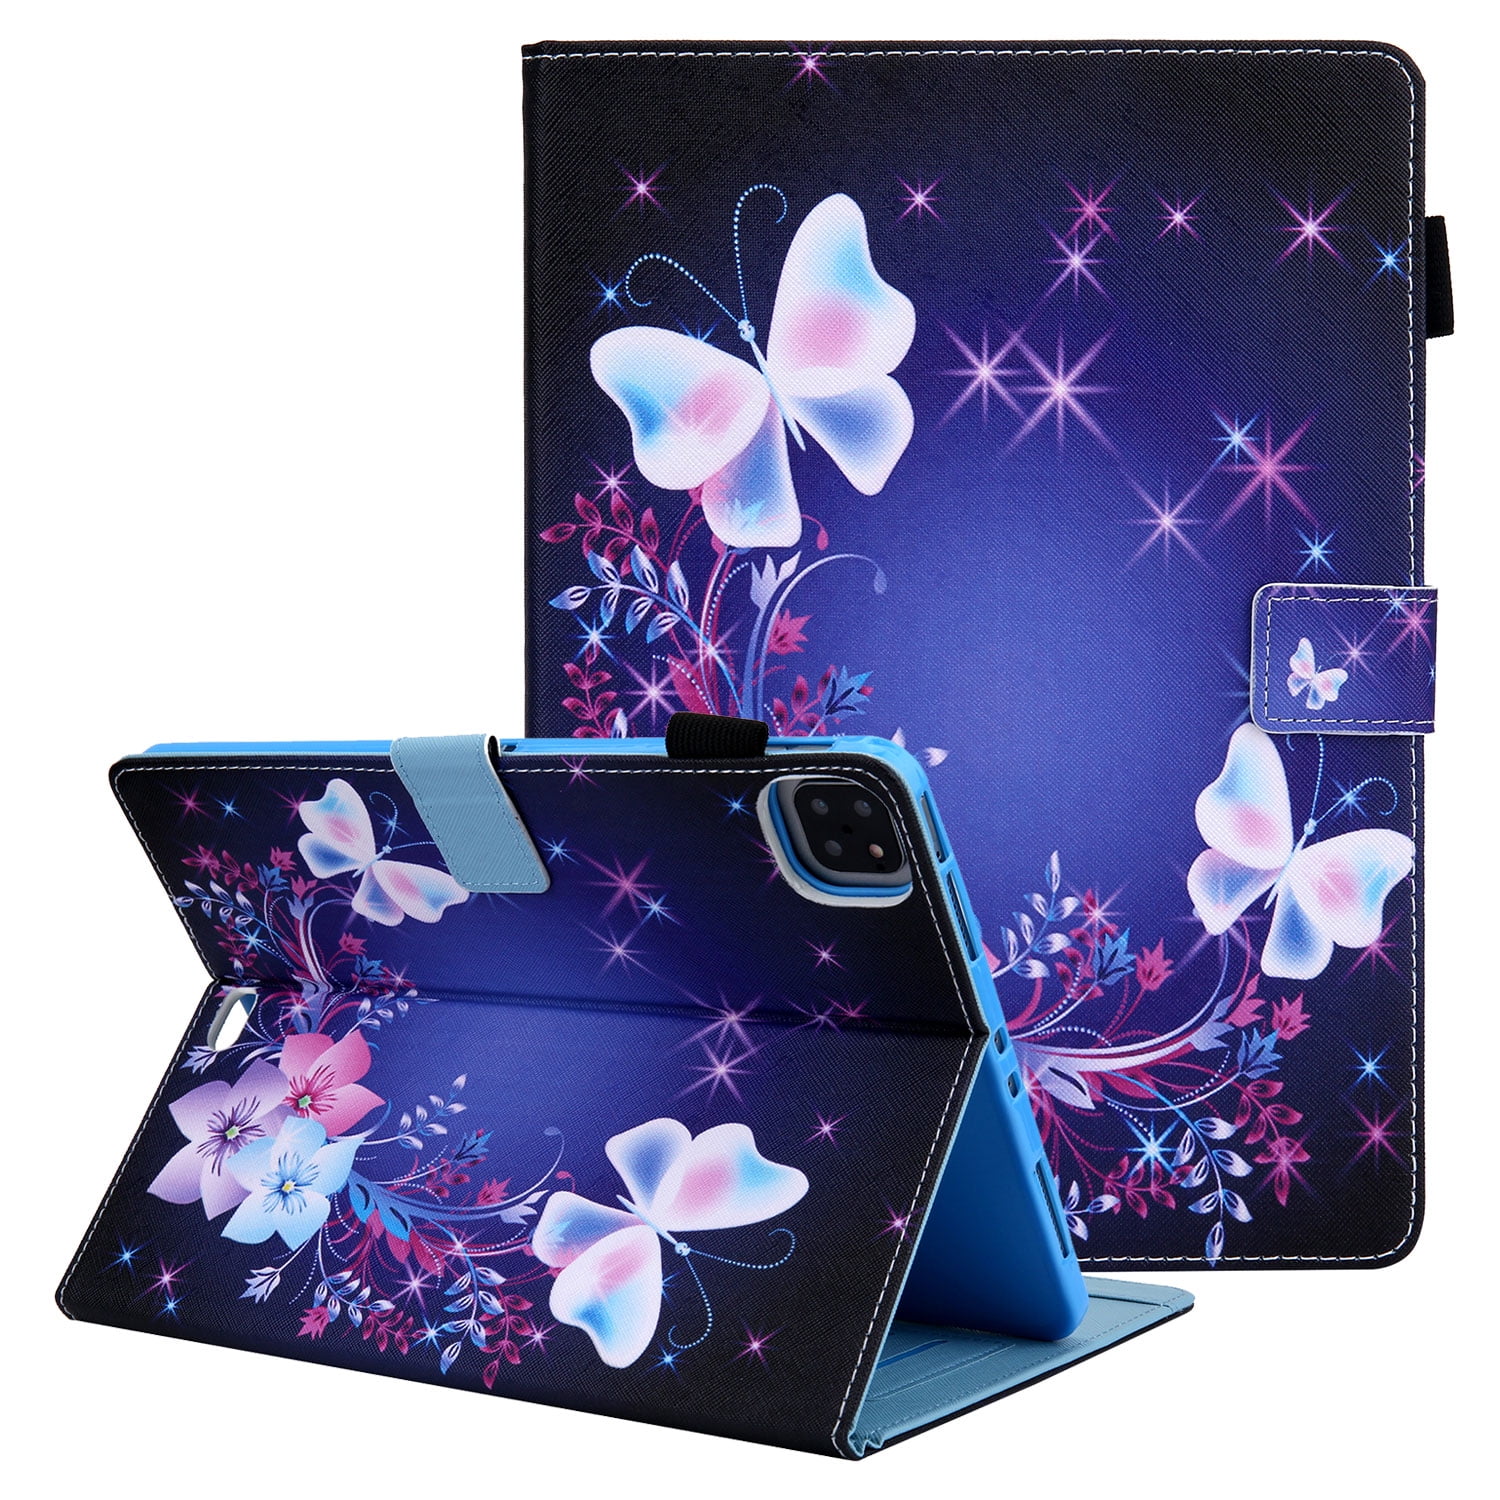 9.5-10.5 inch Tablet Universal Case Purple Butterfly Samsung Galaxy Tab A 10.1/Tab E 9.6 and More 9.5-10.5inch Tablet JZCreater Synthetic Leather Case Cover for iPad Air,New iPad 5th/6th Gen 